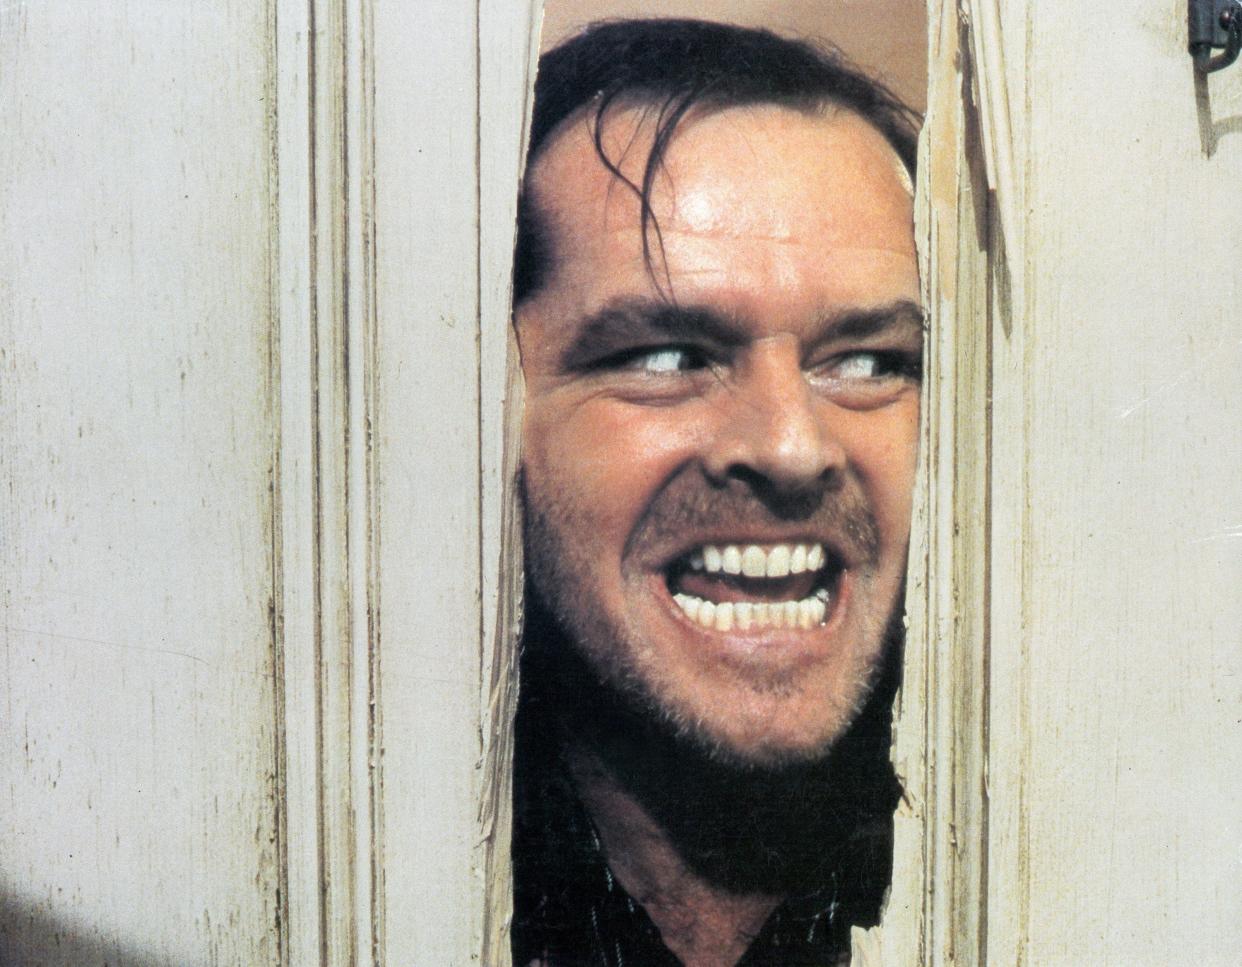 Heeere's Johnny: Jack Nicholson peers through a hole chopped into a door in "The Shining"